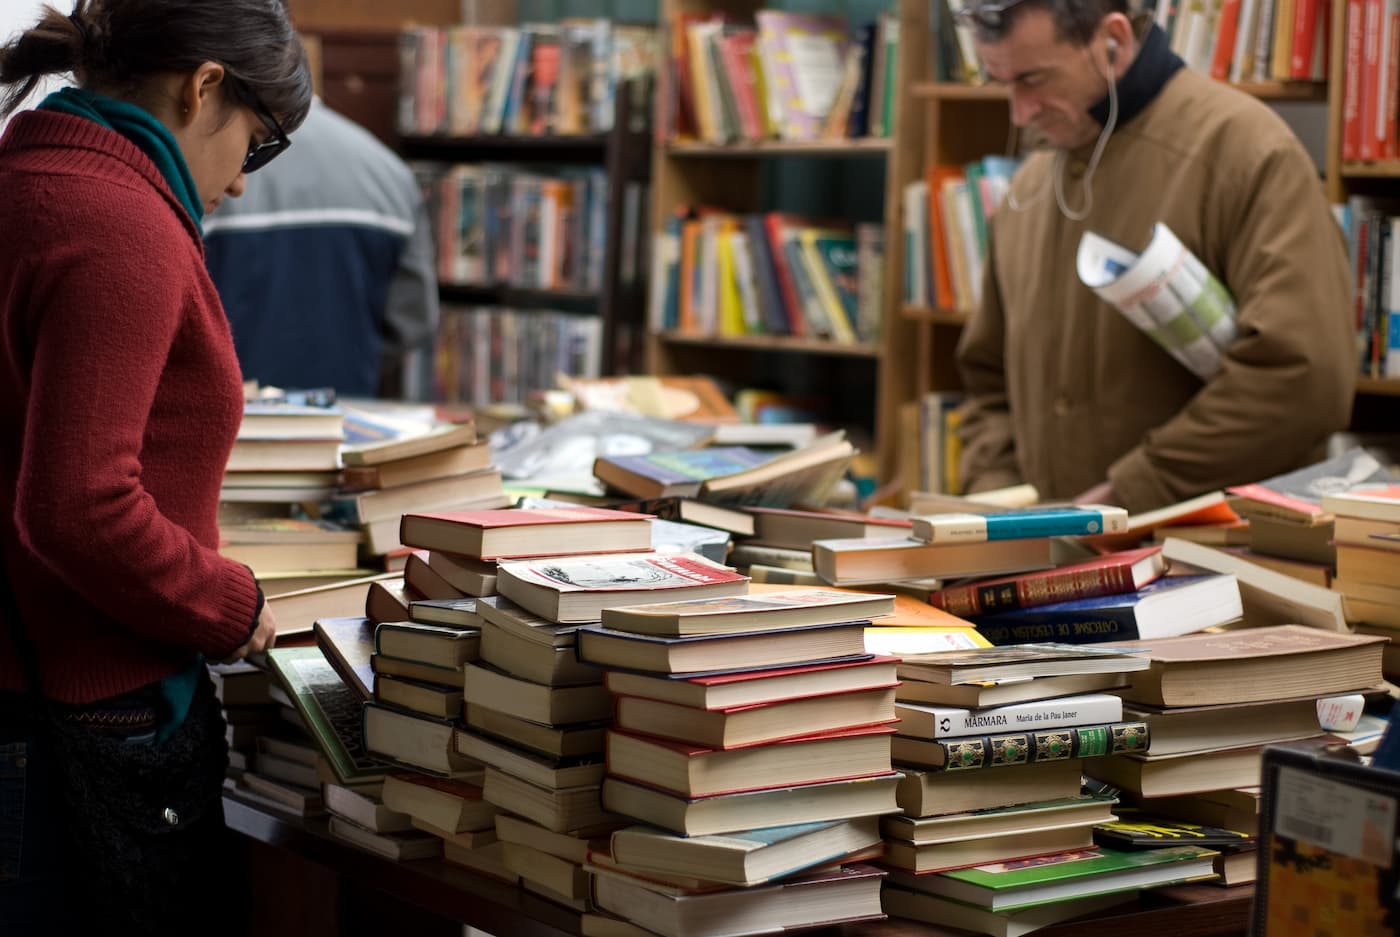 People sorting through books at bookstore